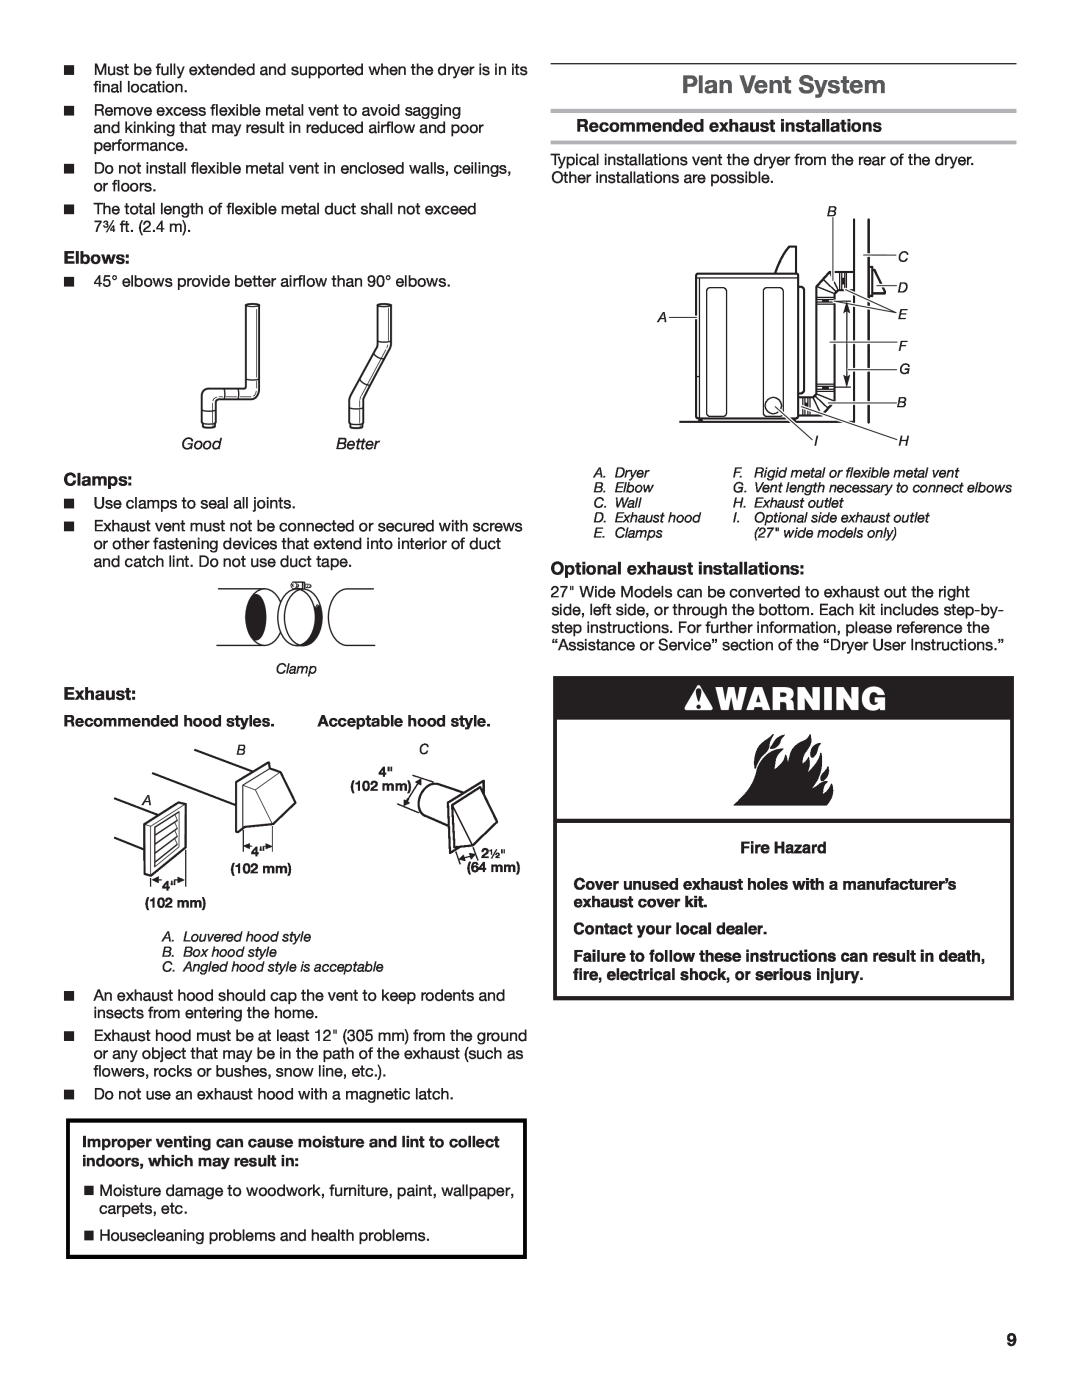 Maytag W10296136A-SP, W10296135A Plan Vent System, Recommended exhaust installations, Elbows, Clamps, Exhaust, GoodBetter 